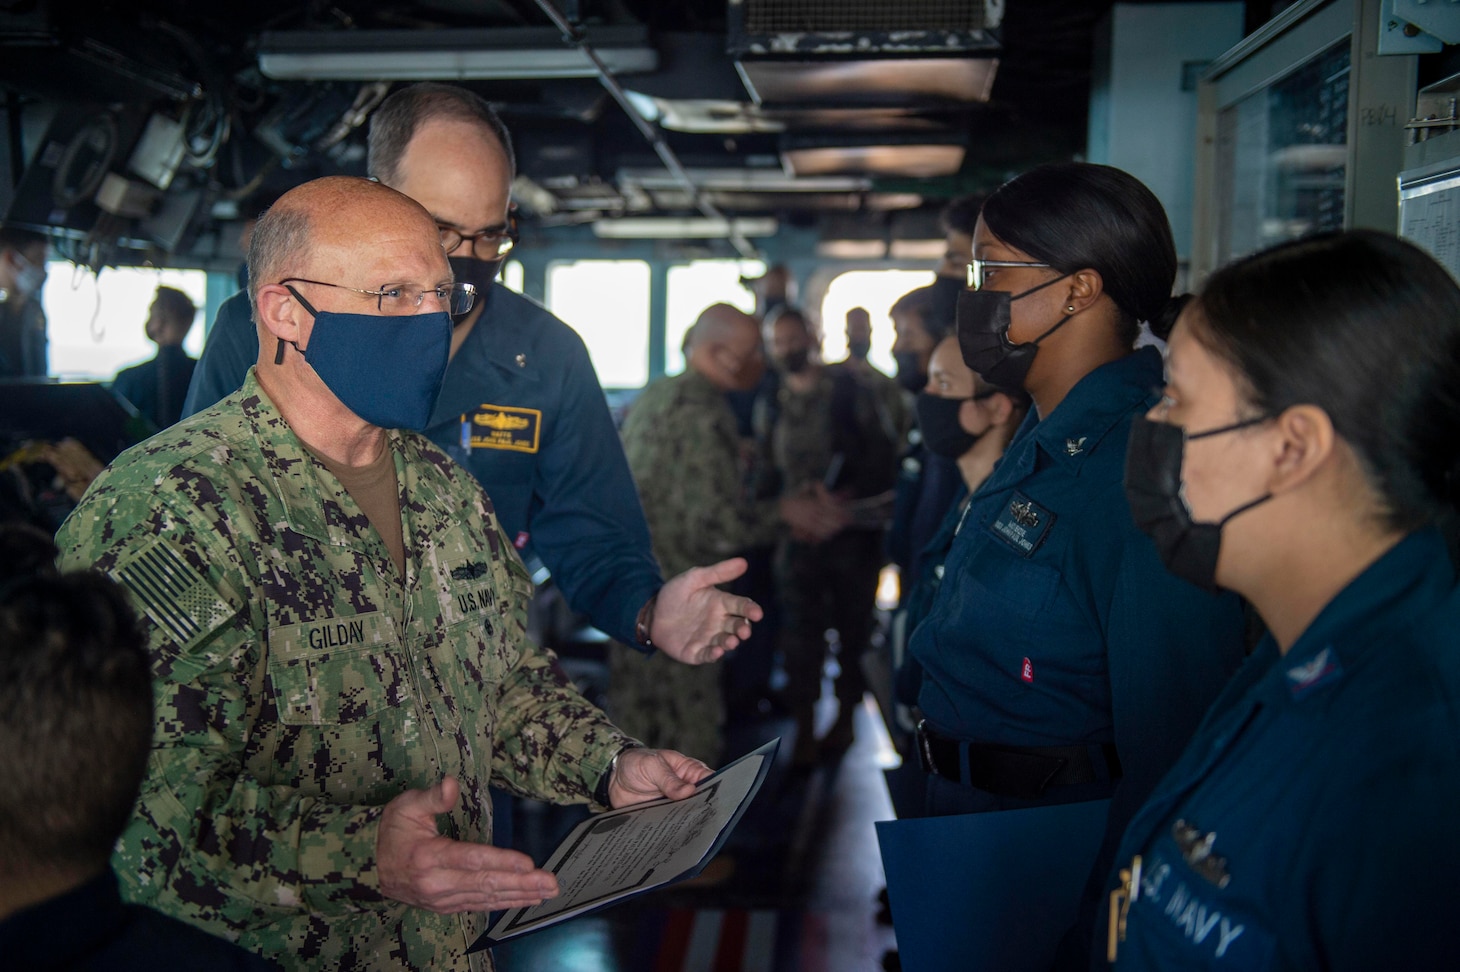 Chief of Naval Operations Adm. Mike Gilday greets Gas Turbine System Technician 3rd Class Maritza Dominguez in the pilot house aboard the guided-missile destroyer USS John Paul Jones (DDG 53).